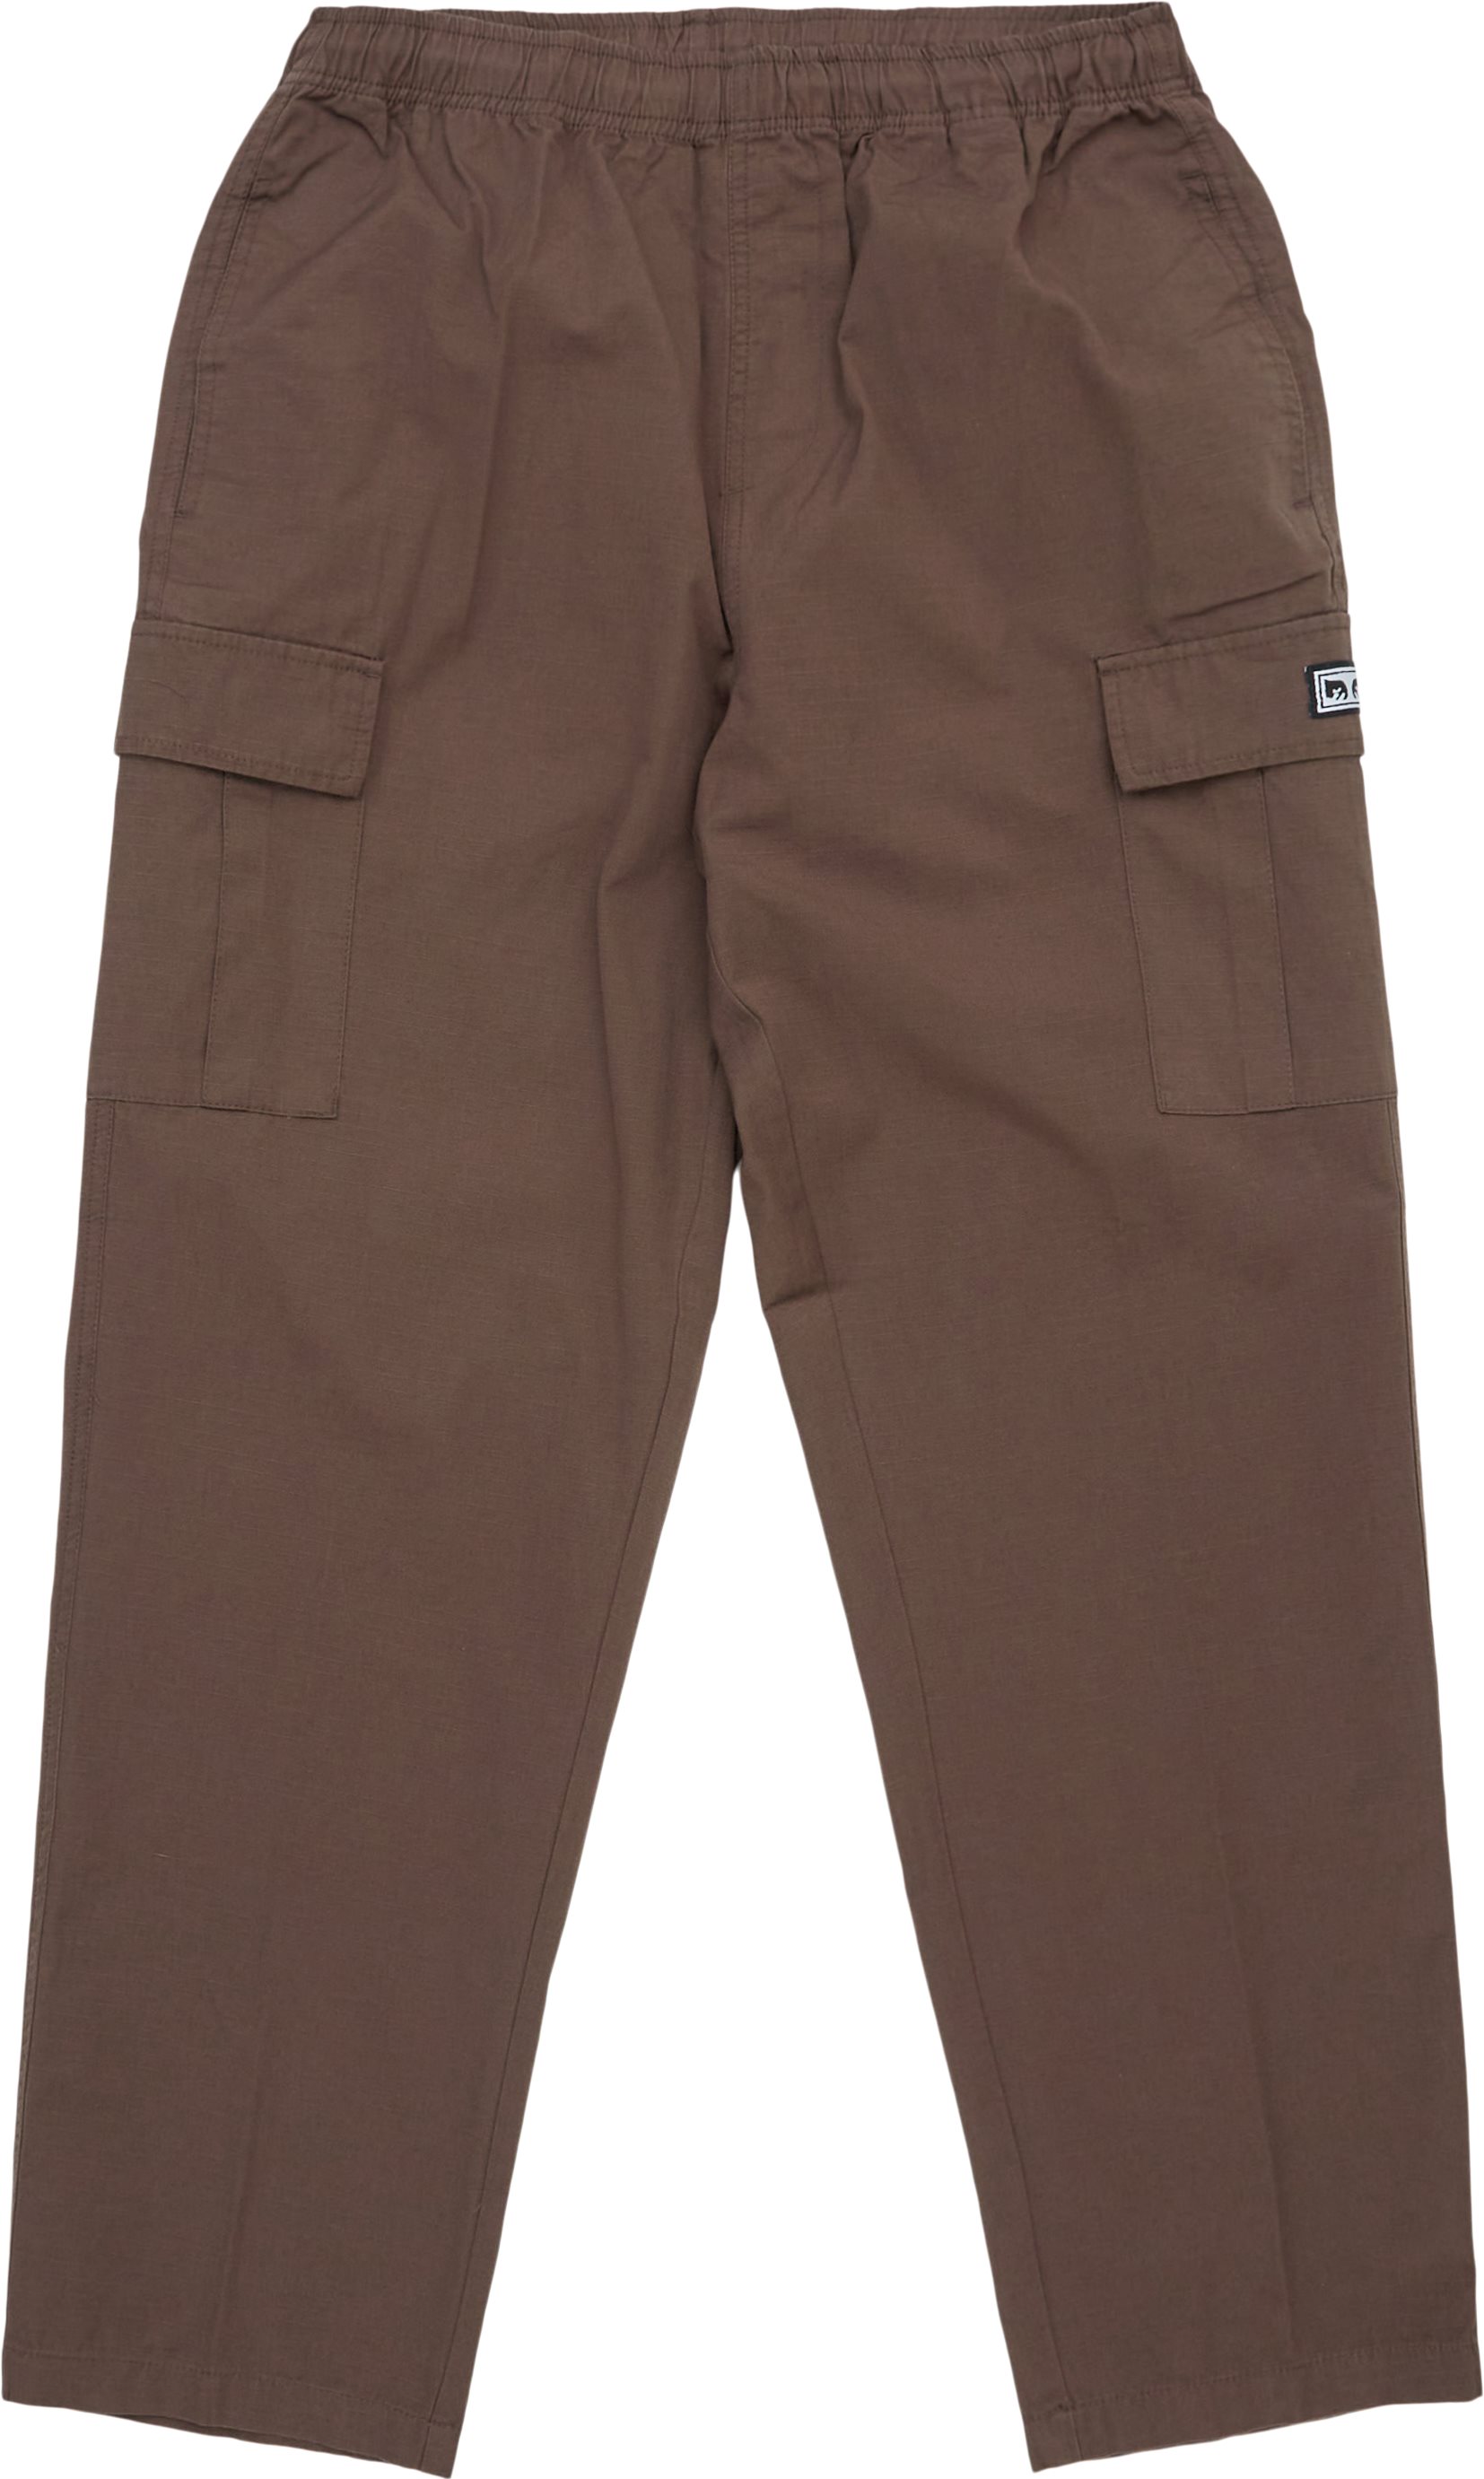 Obey Byxor EASY RIPSTOP CARGO PANT 142020196 Brun